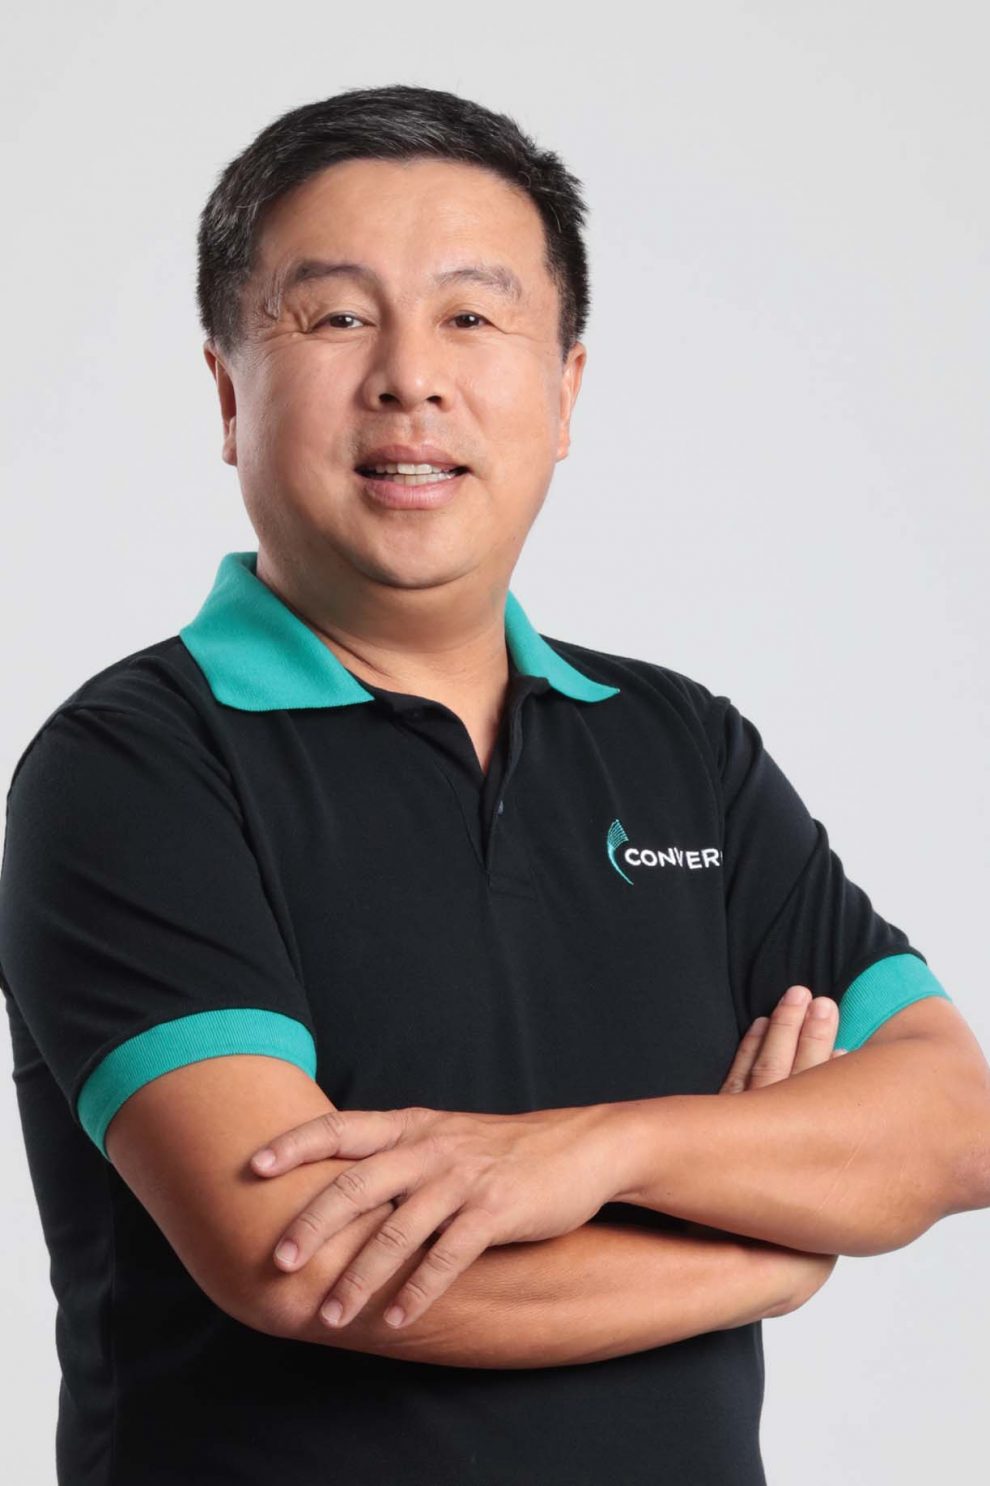 D:\ROBBY PERSONAL FILES 2013\RMA FILES\CONVERGE ICT SOLUTIONS INC\MINERVA STOCK ARTICLE\Dennis Anthony Uy_CEO and Co founder.jpg